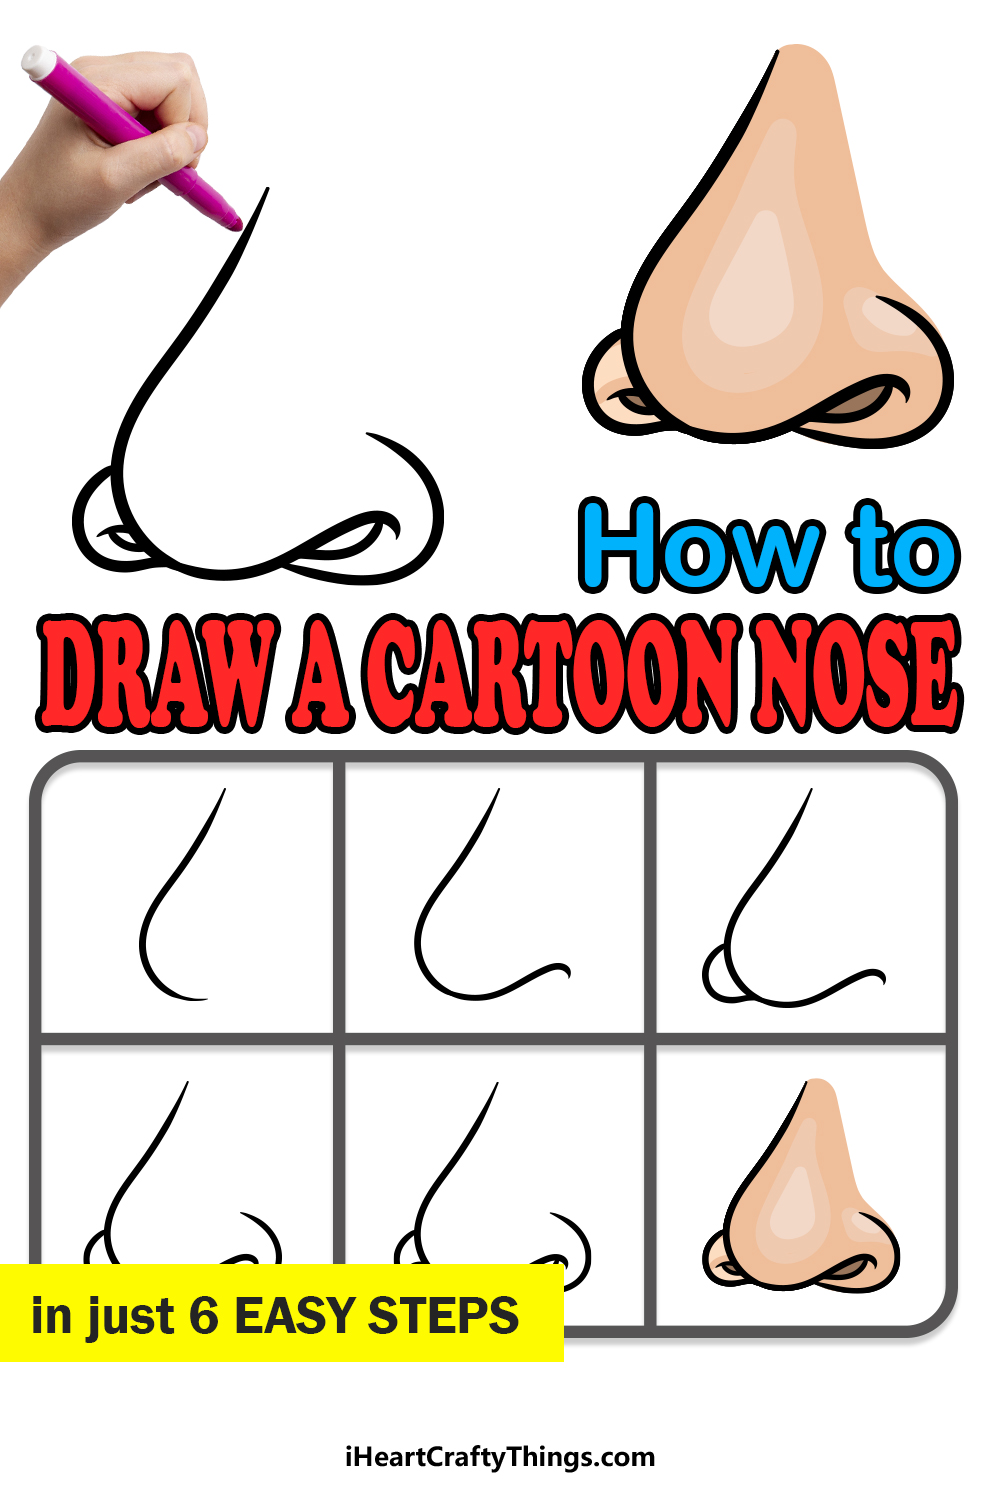 how to draw a cartoon nose in 6 easy steps